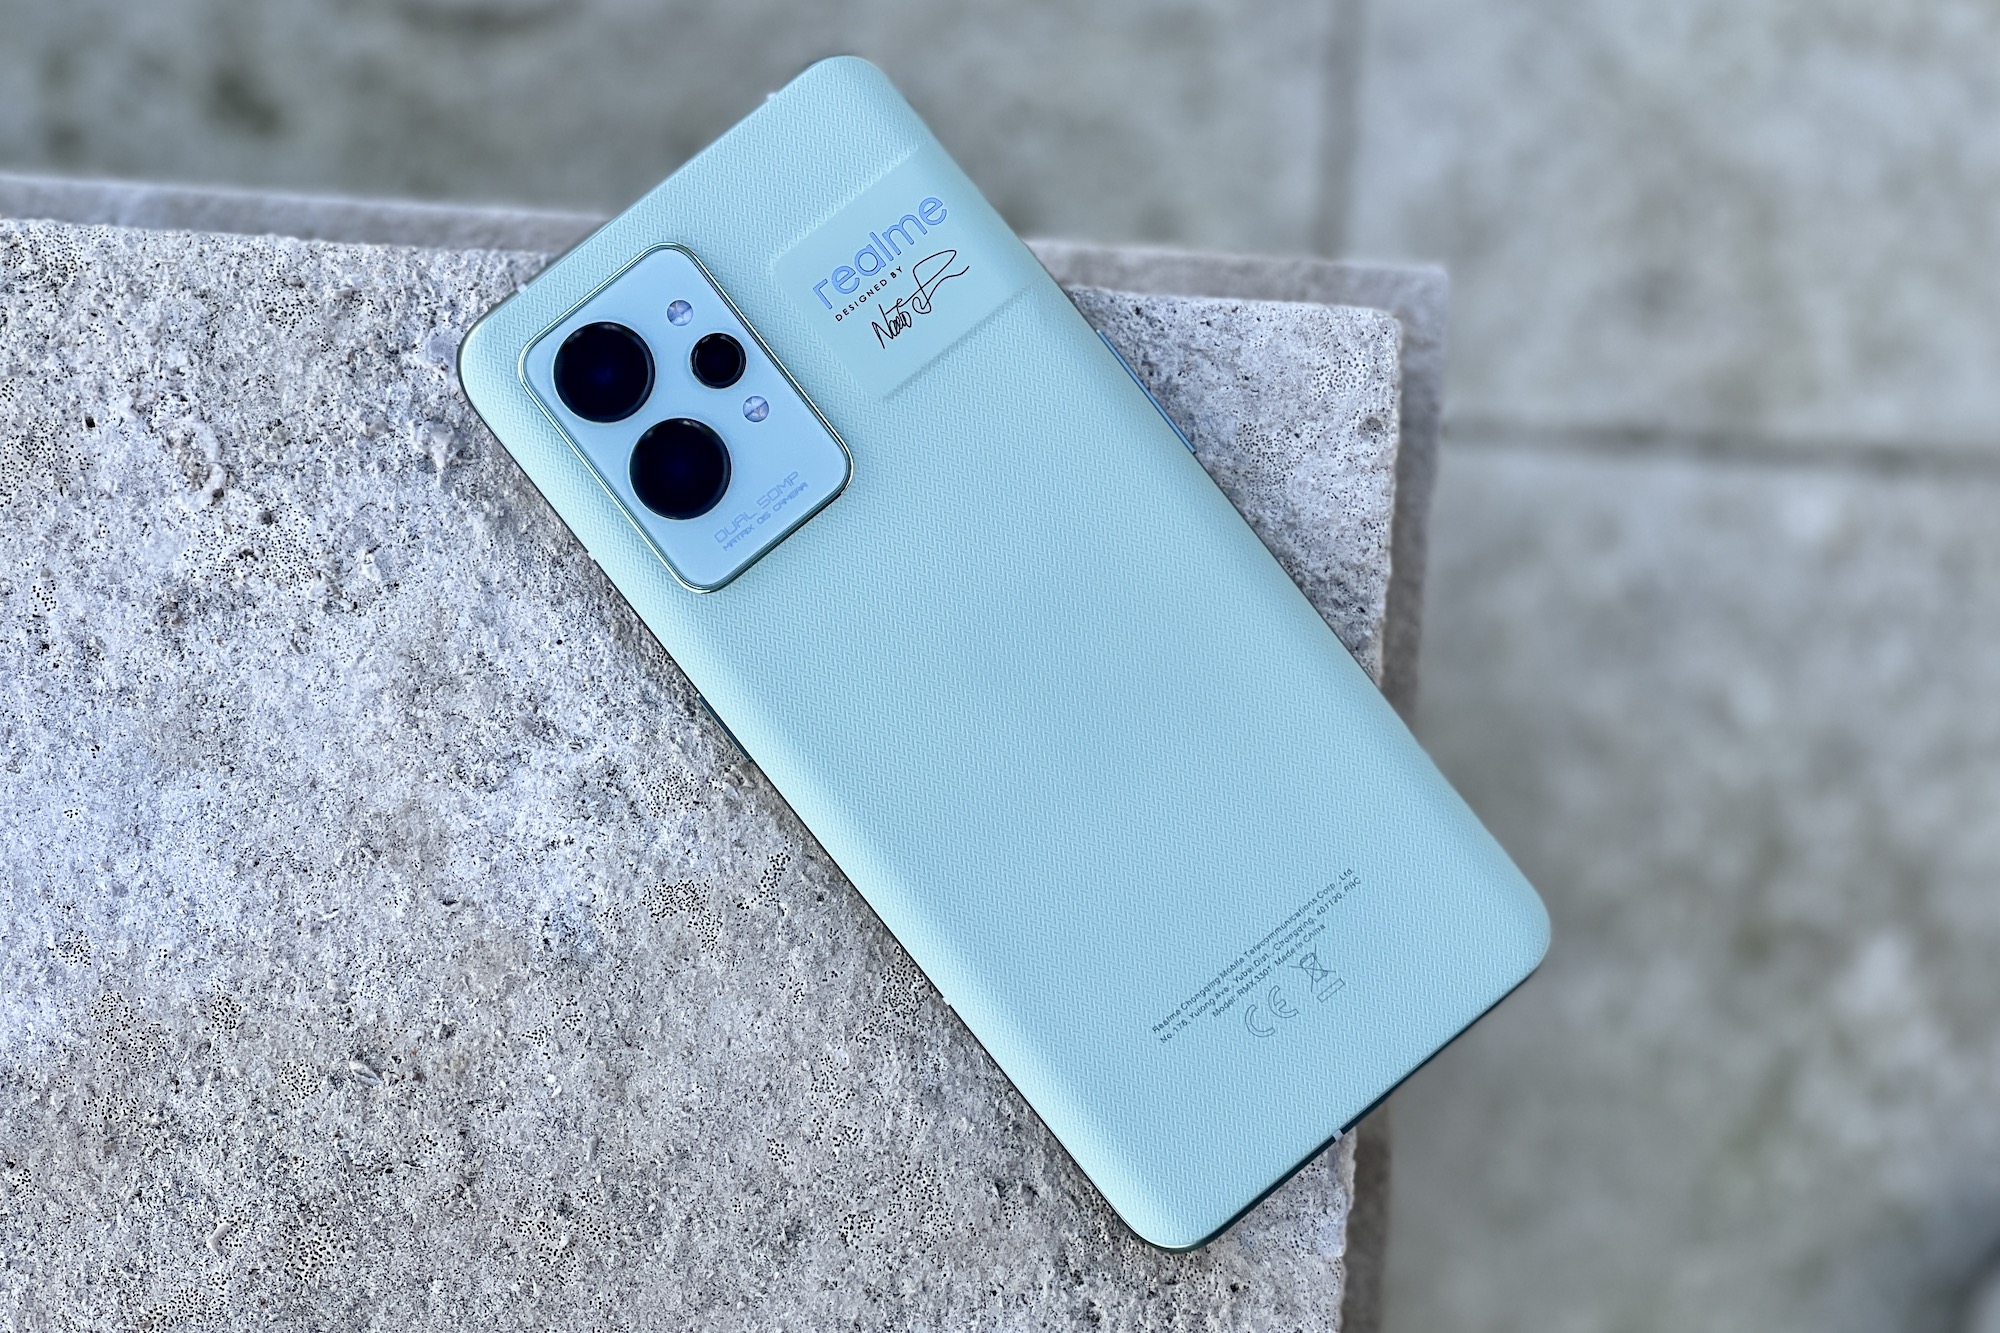 The Realme GT 2 Pro has a crazy wider-than-wide-angle camera